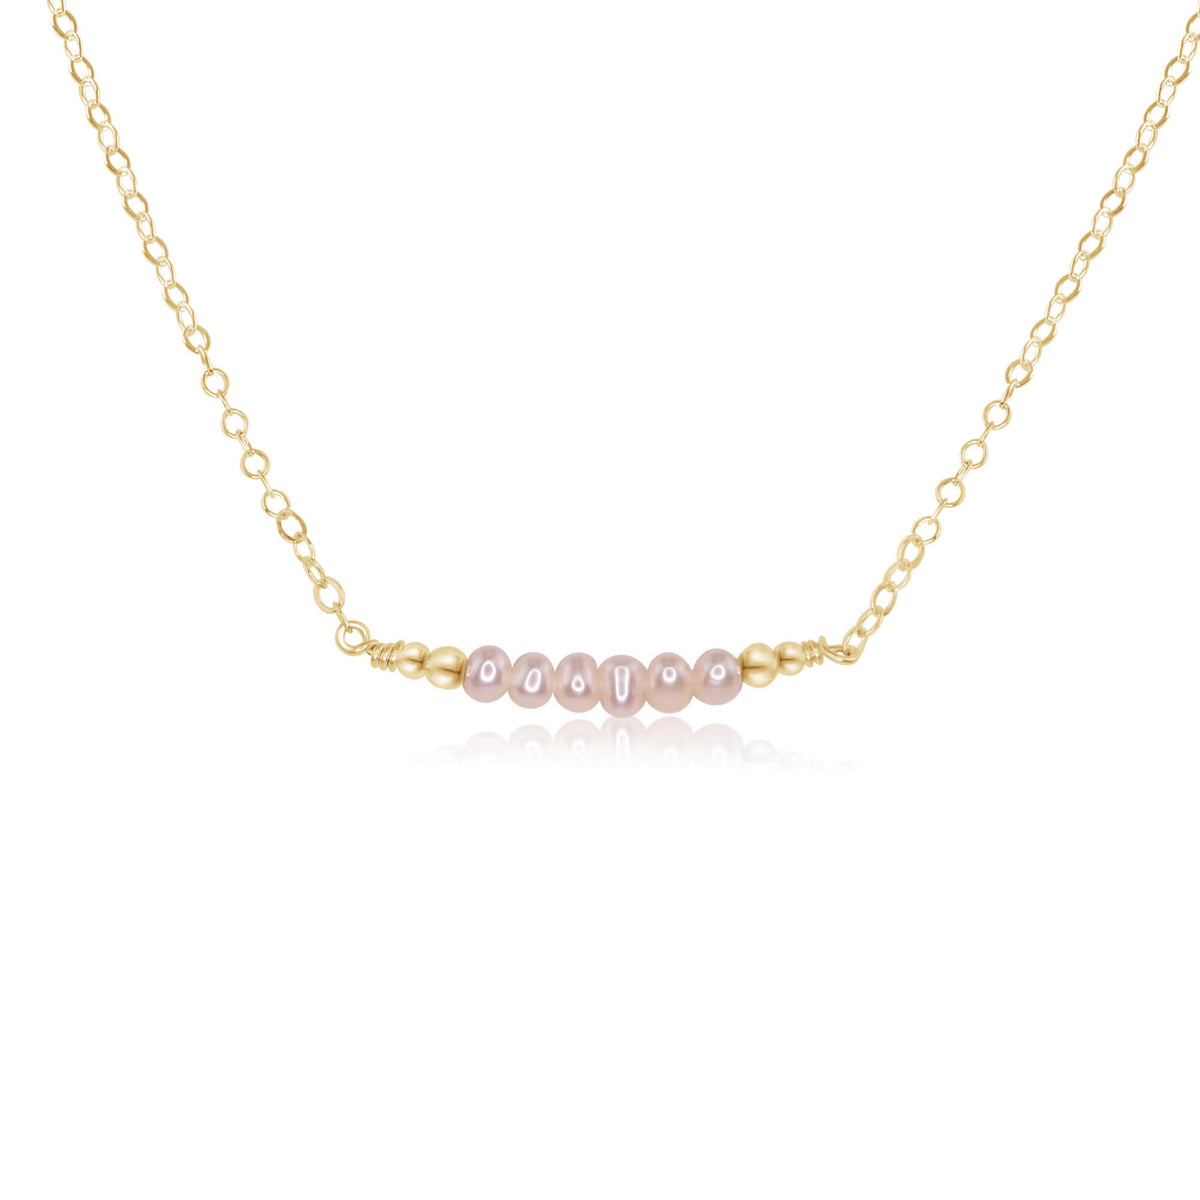 Faceted Bead Bar Necklace - Freshwater Pearl - 14K Gold Fill - Luna Tide Handmade Jewellery